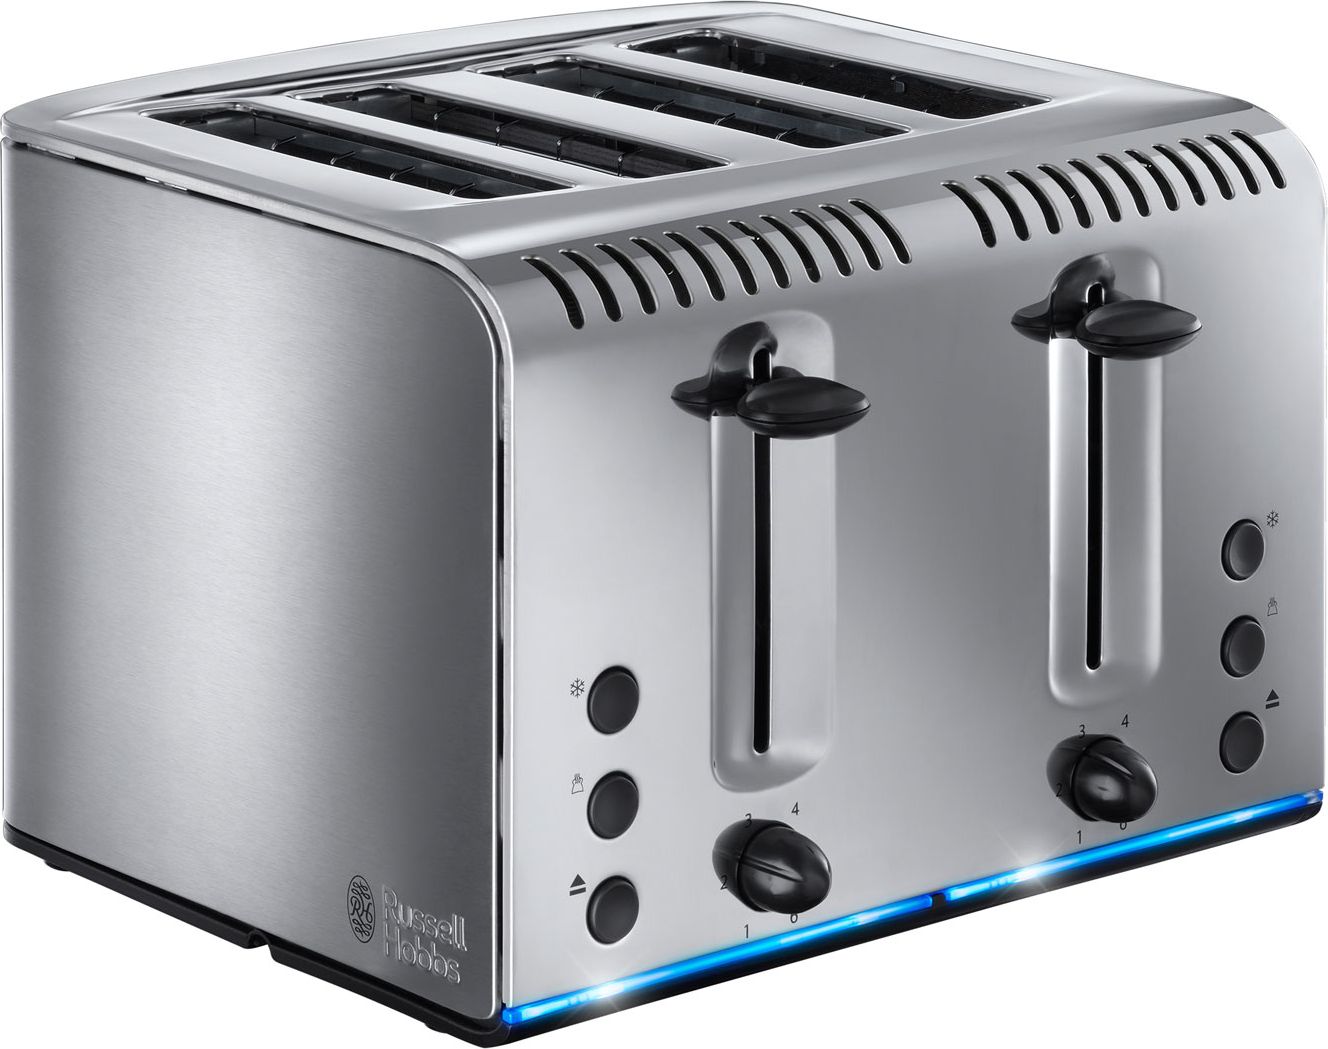 WIN an Iconic Dualit Toaster, Kettle & Hand Blender worth over £450